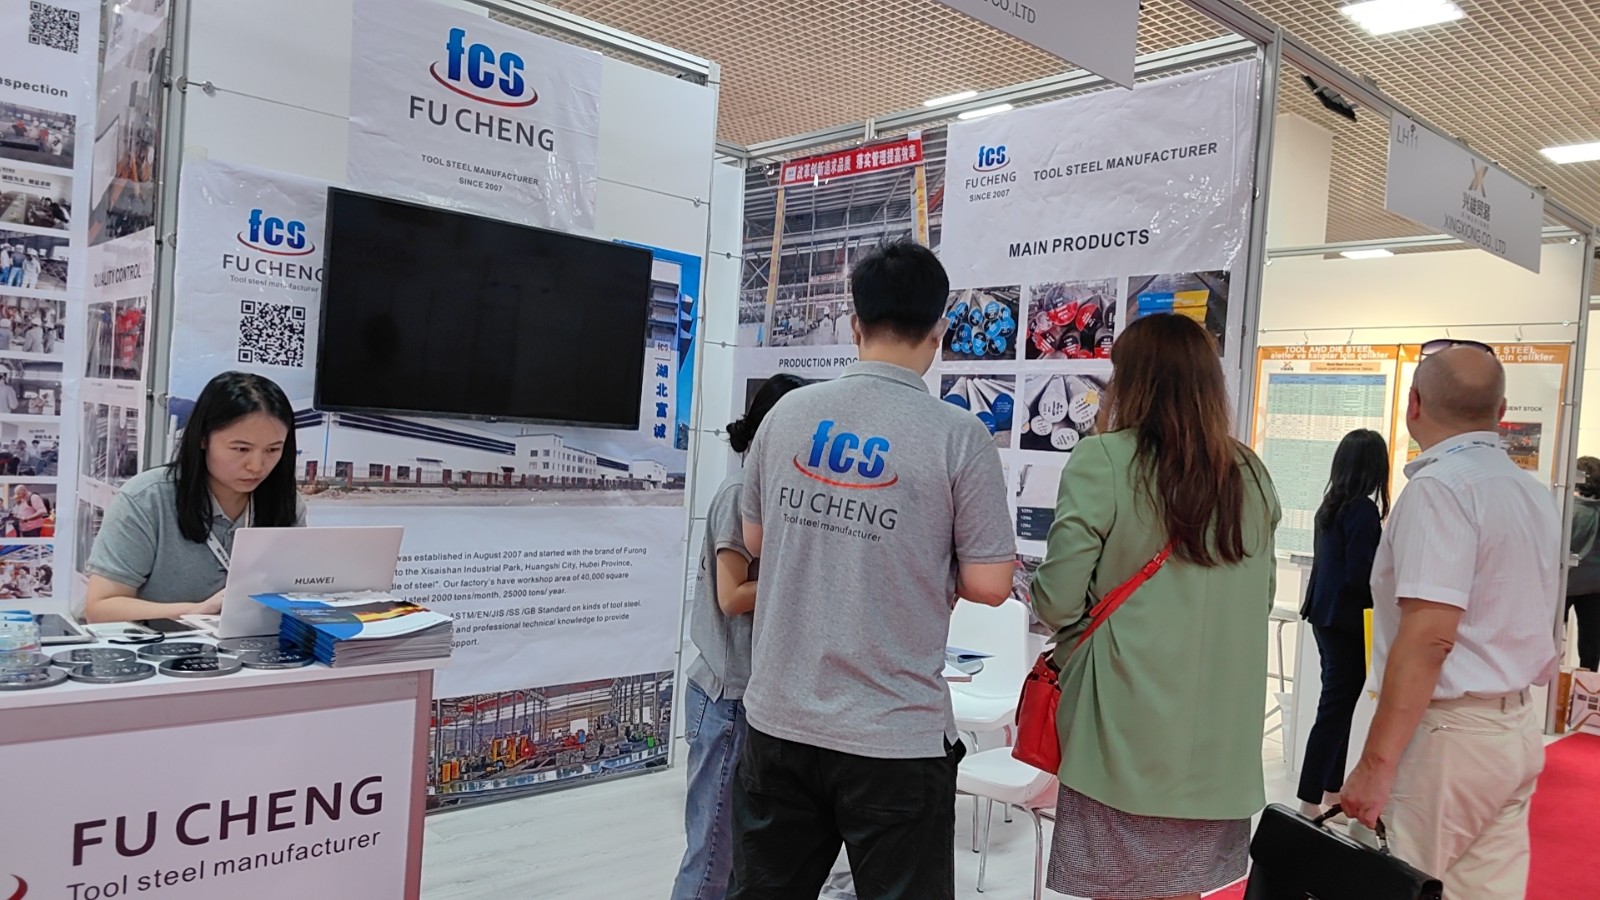 FCS Participation in Exhibitions